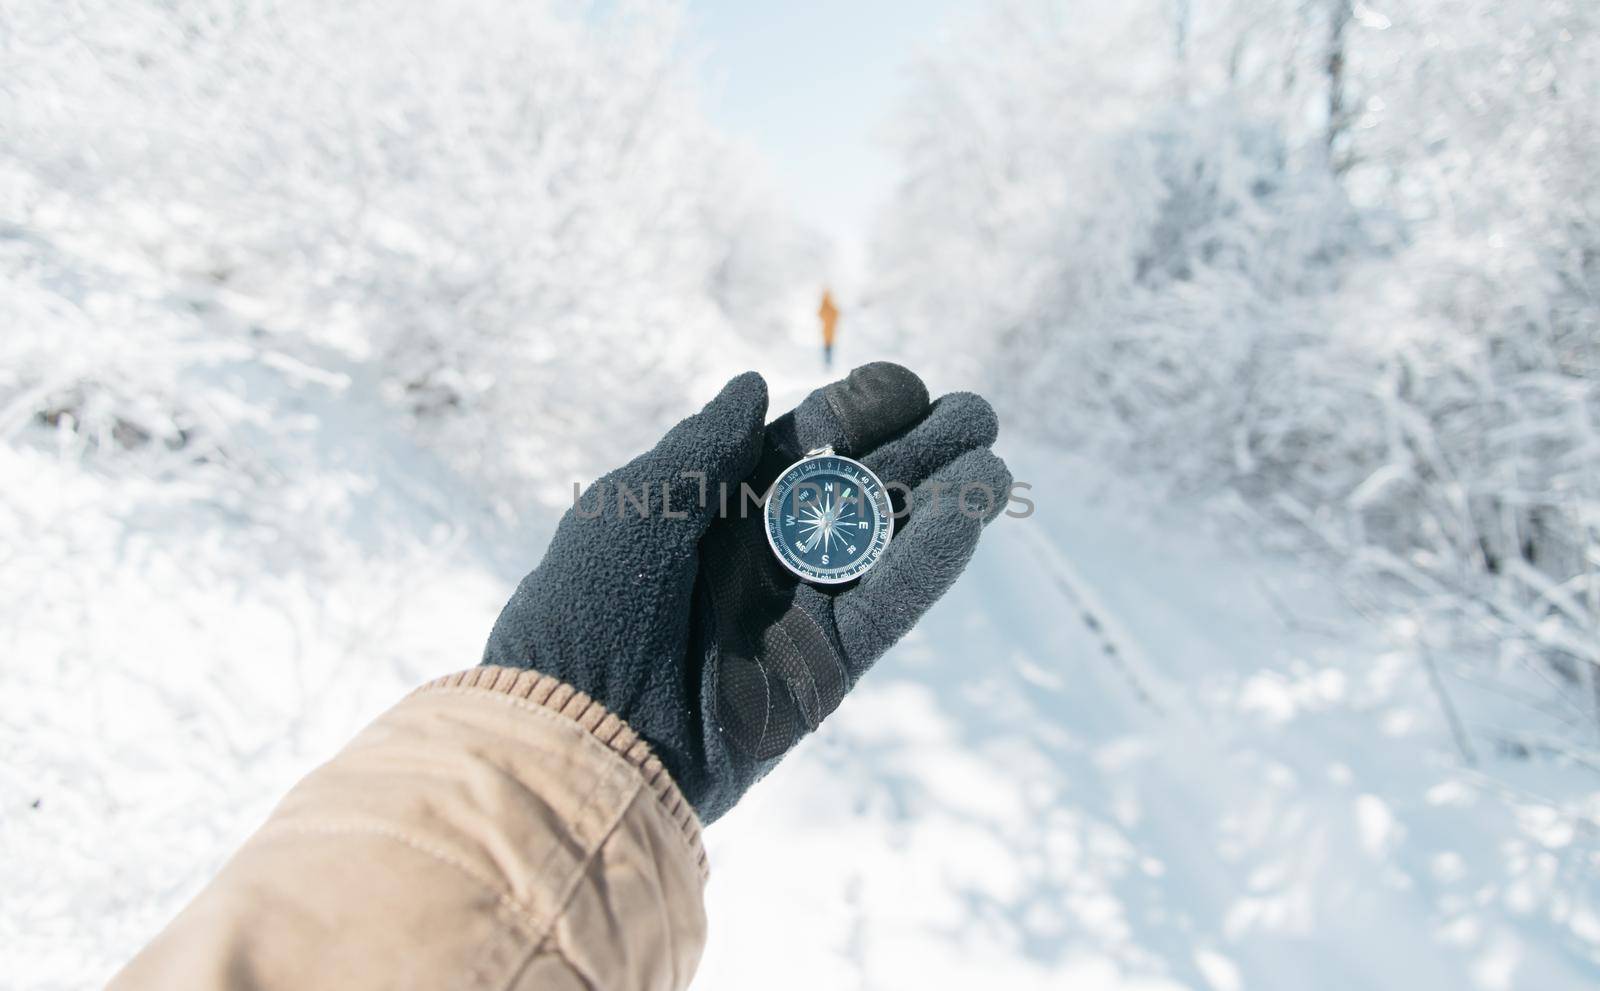 With compass in winter outdoor. by alexAleksei